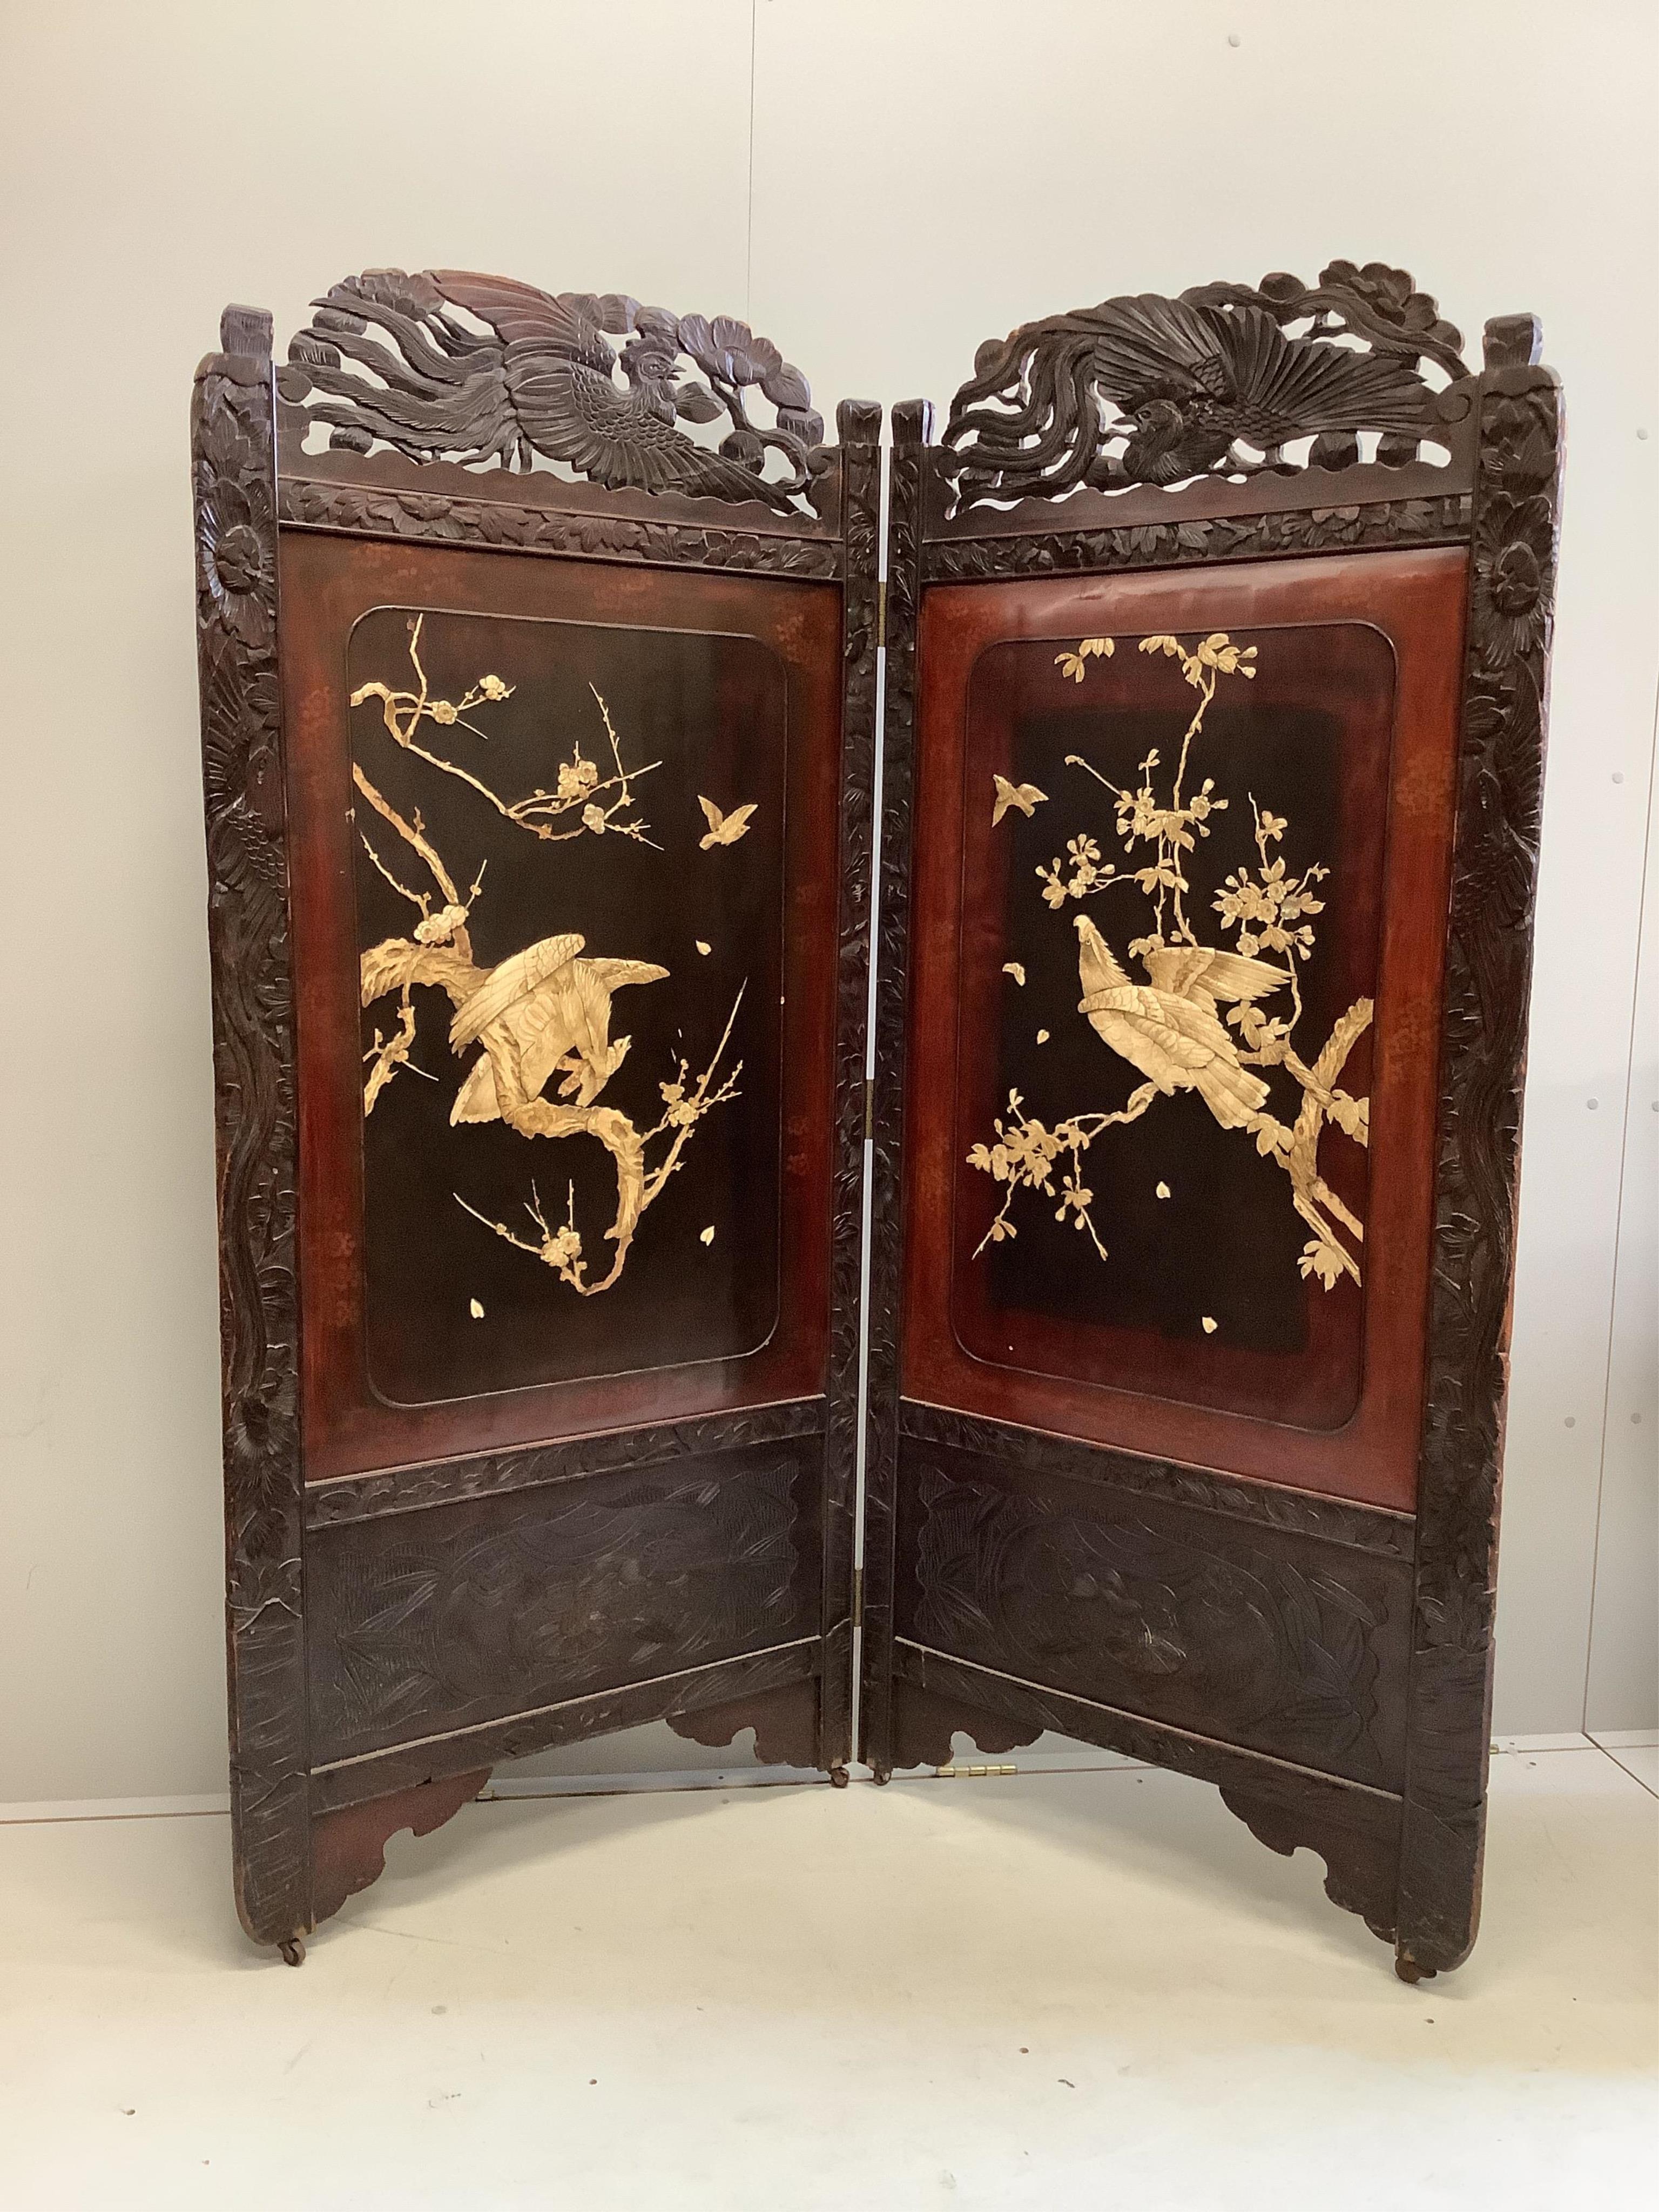 A Japanese carved wood bi-fold screen inset with lacquer and bone ‘eagle’ panels, each panel, width 79cm, height 180cm. Condition - fair